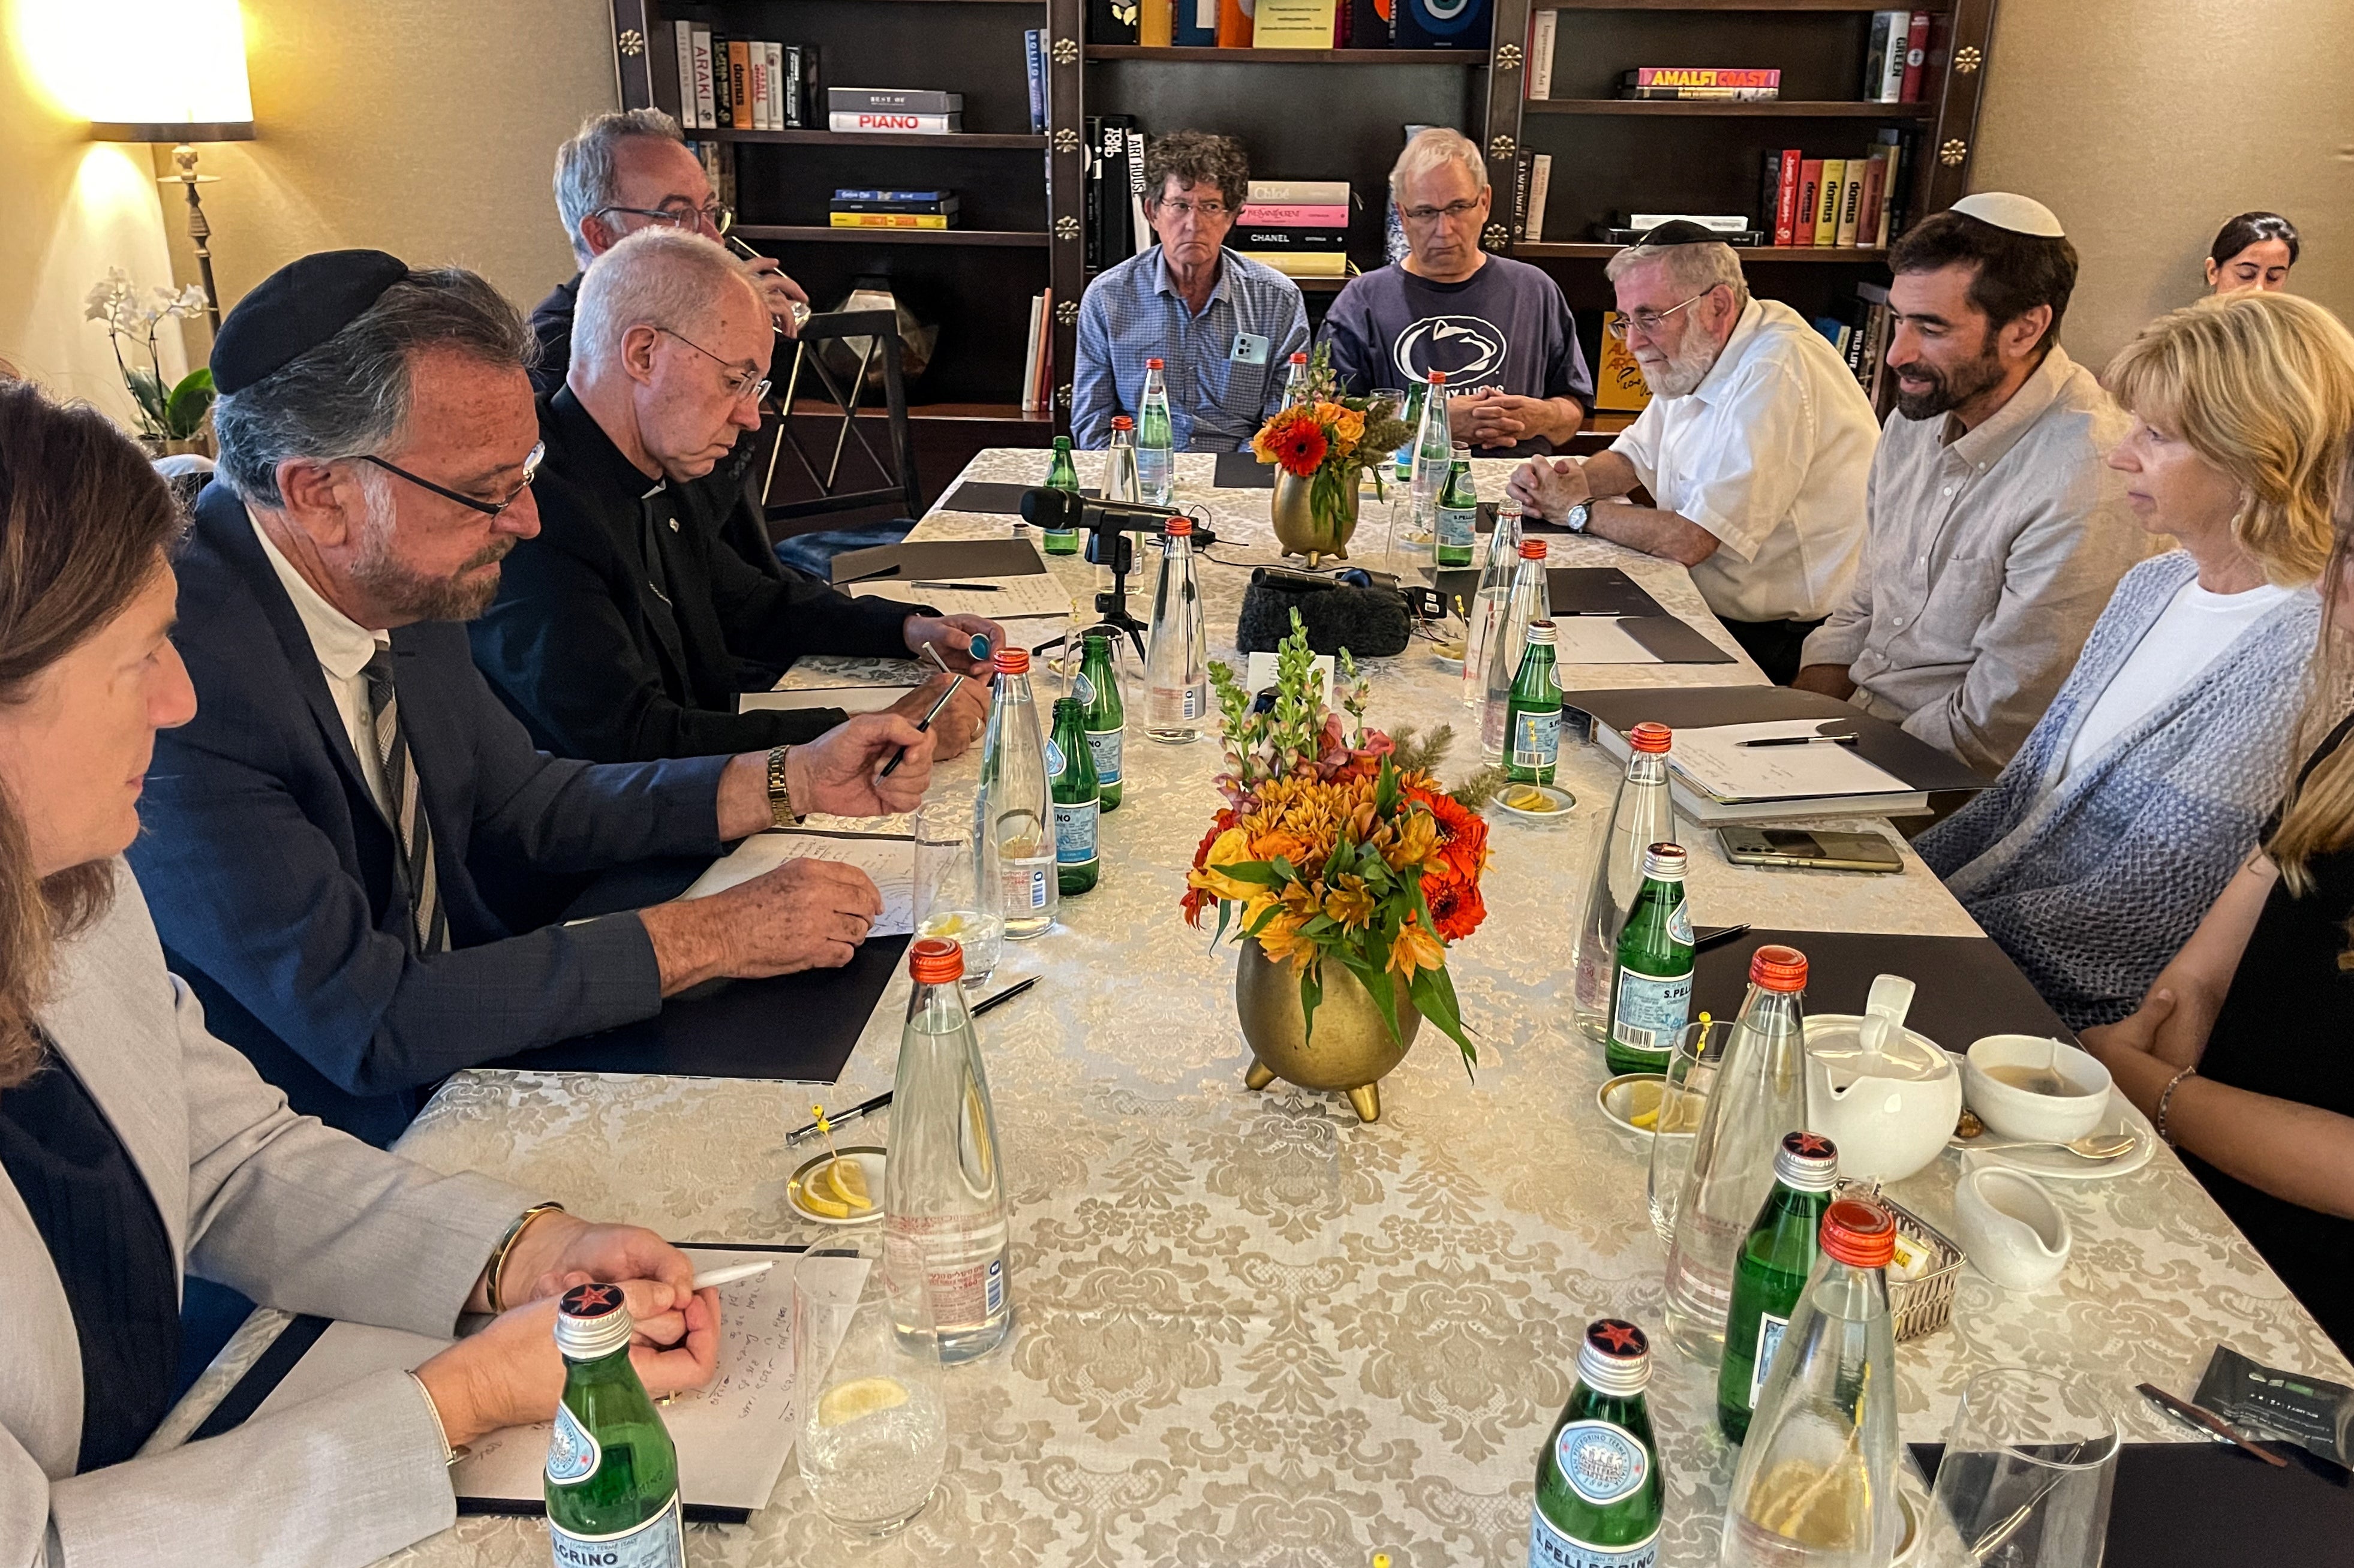 Archbishop of Canterbury Justin Welby meets with the parents and extended family of 22-year-old Yosef Malachi, who was killed in Kibbutz Kfar Aza